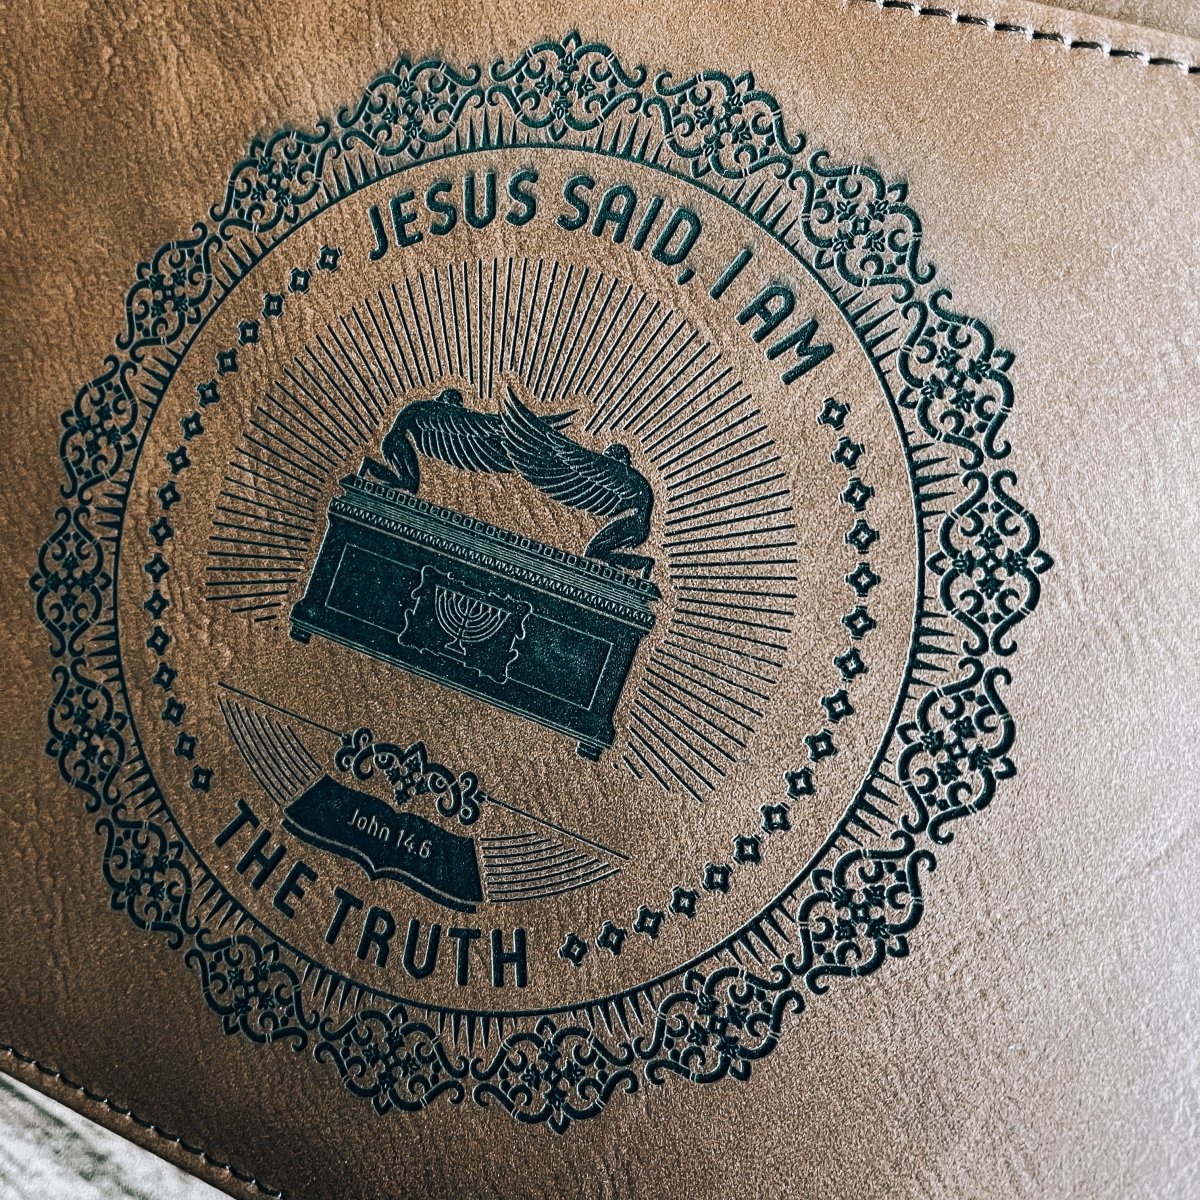 Bible Cover - I AM: The Truth - Bible Cover - The Reformed Sage - #reformed# - #reformed_gifts# - #christian_gifts#